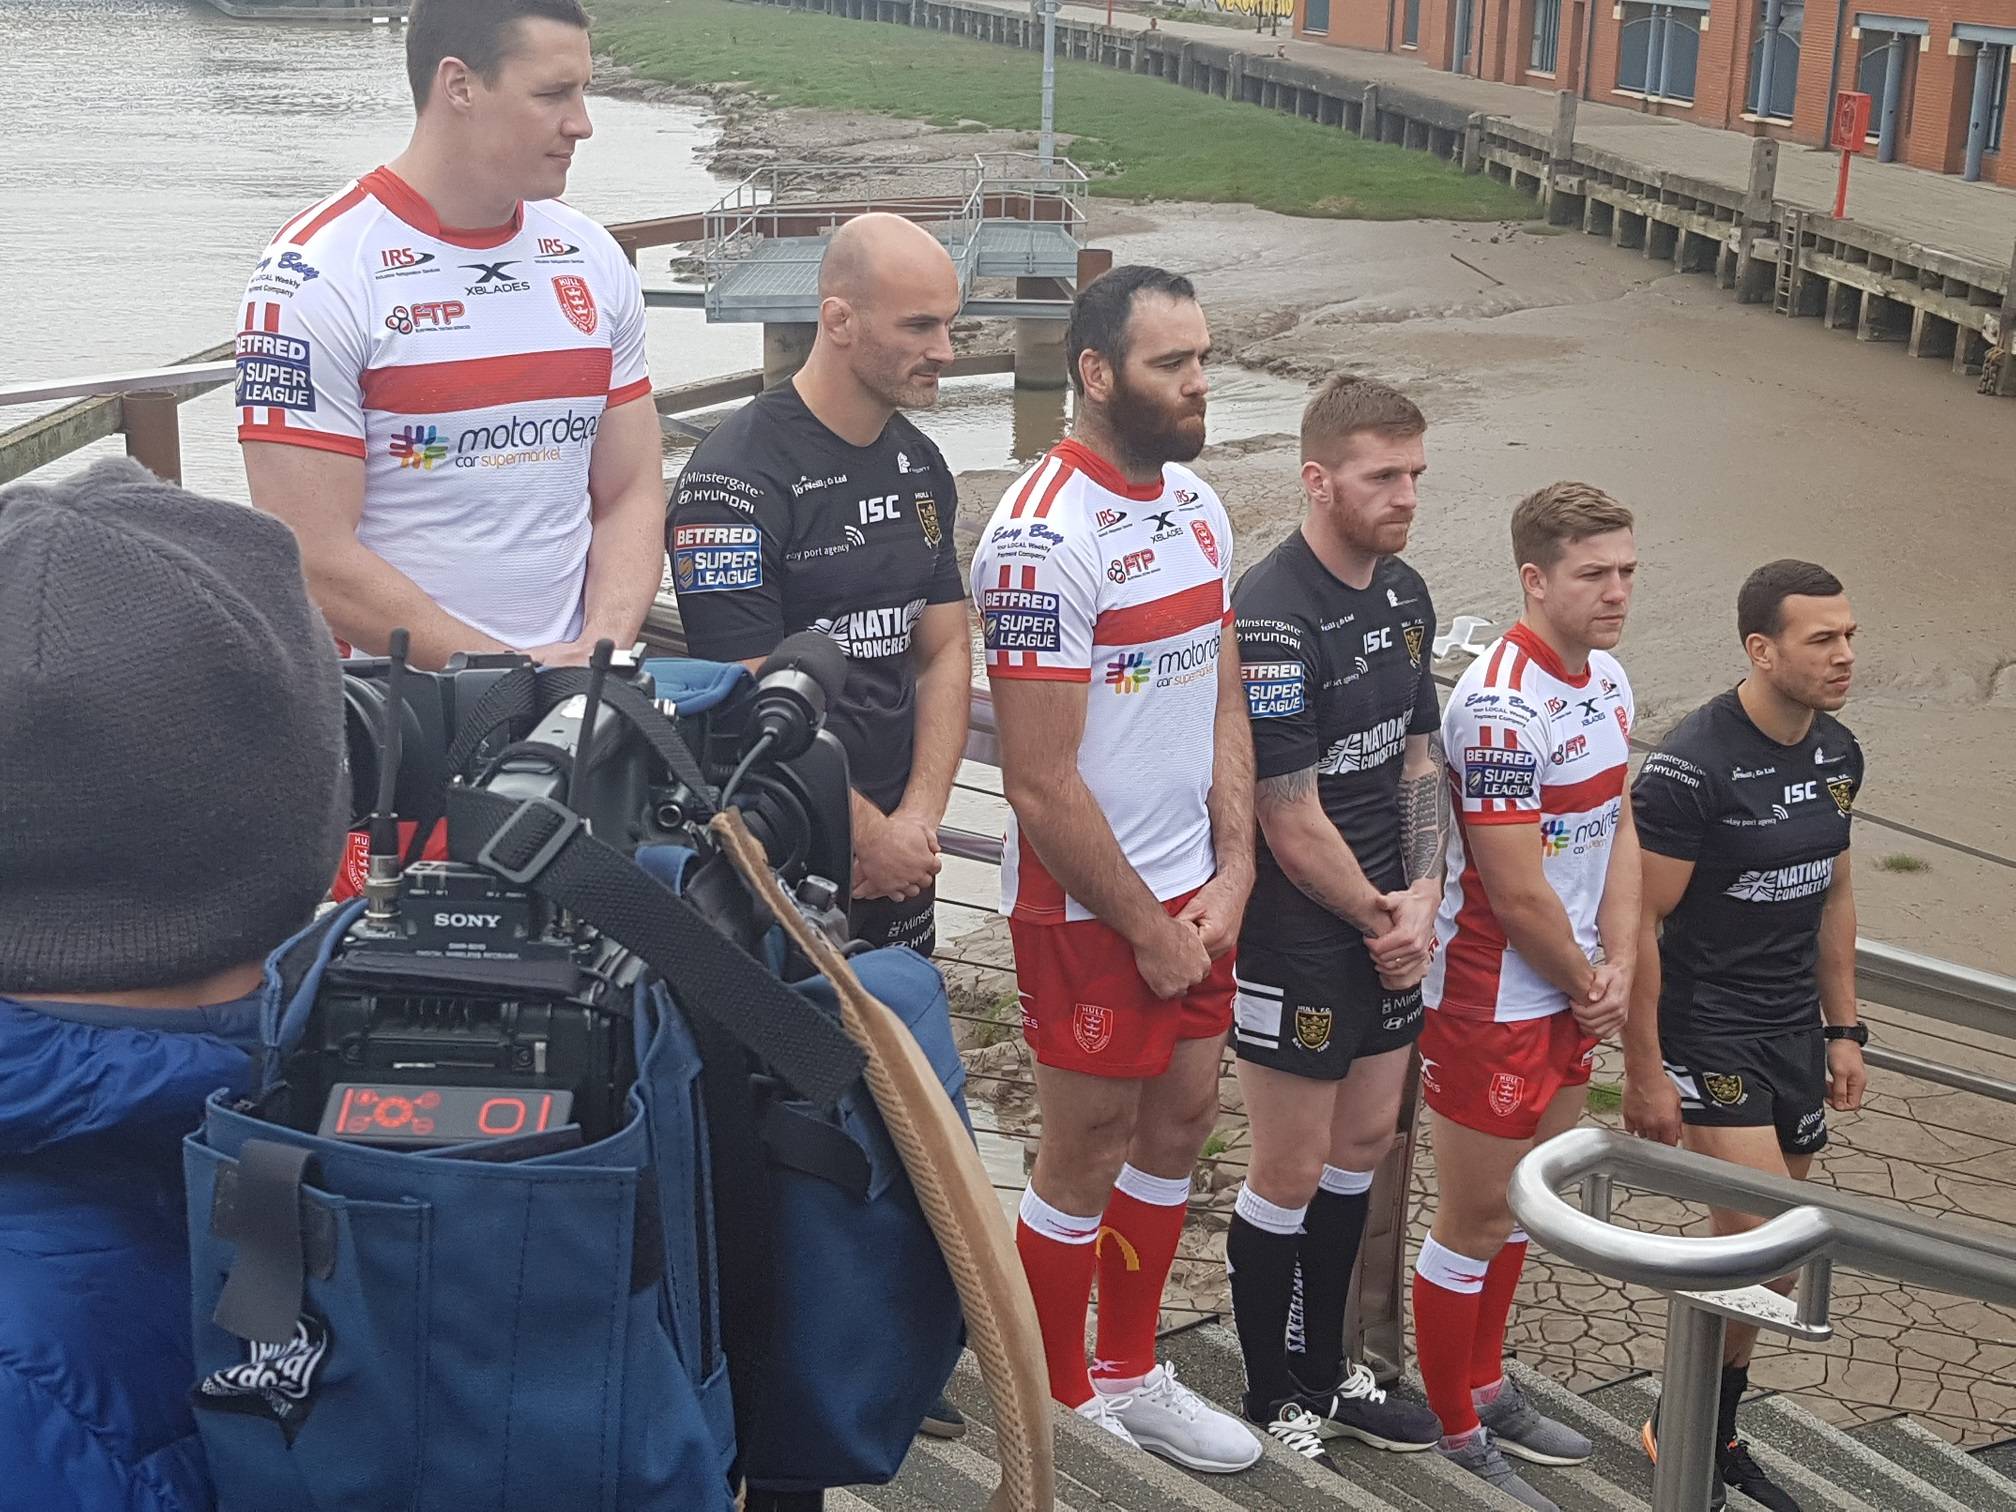 The Hull media was out in force as rugby league stars Joel Tomkins, Danny Houghton, Kane Linnett, Marc Sneed, Chris Atkin and Carlos Tuimavave appeared at Scale Lane Bridge in Hull.